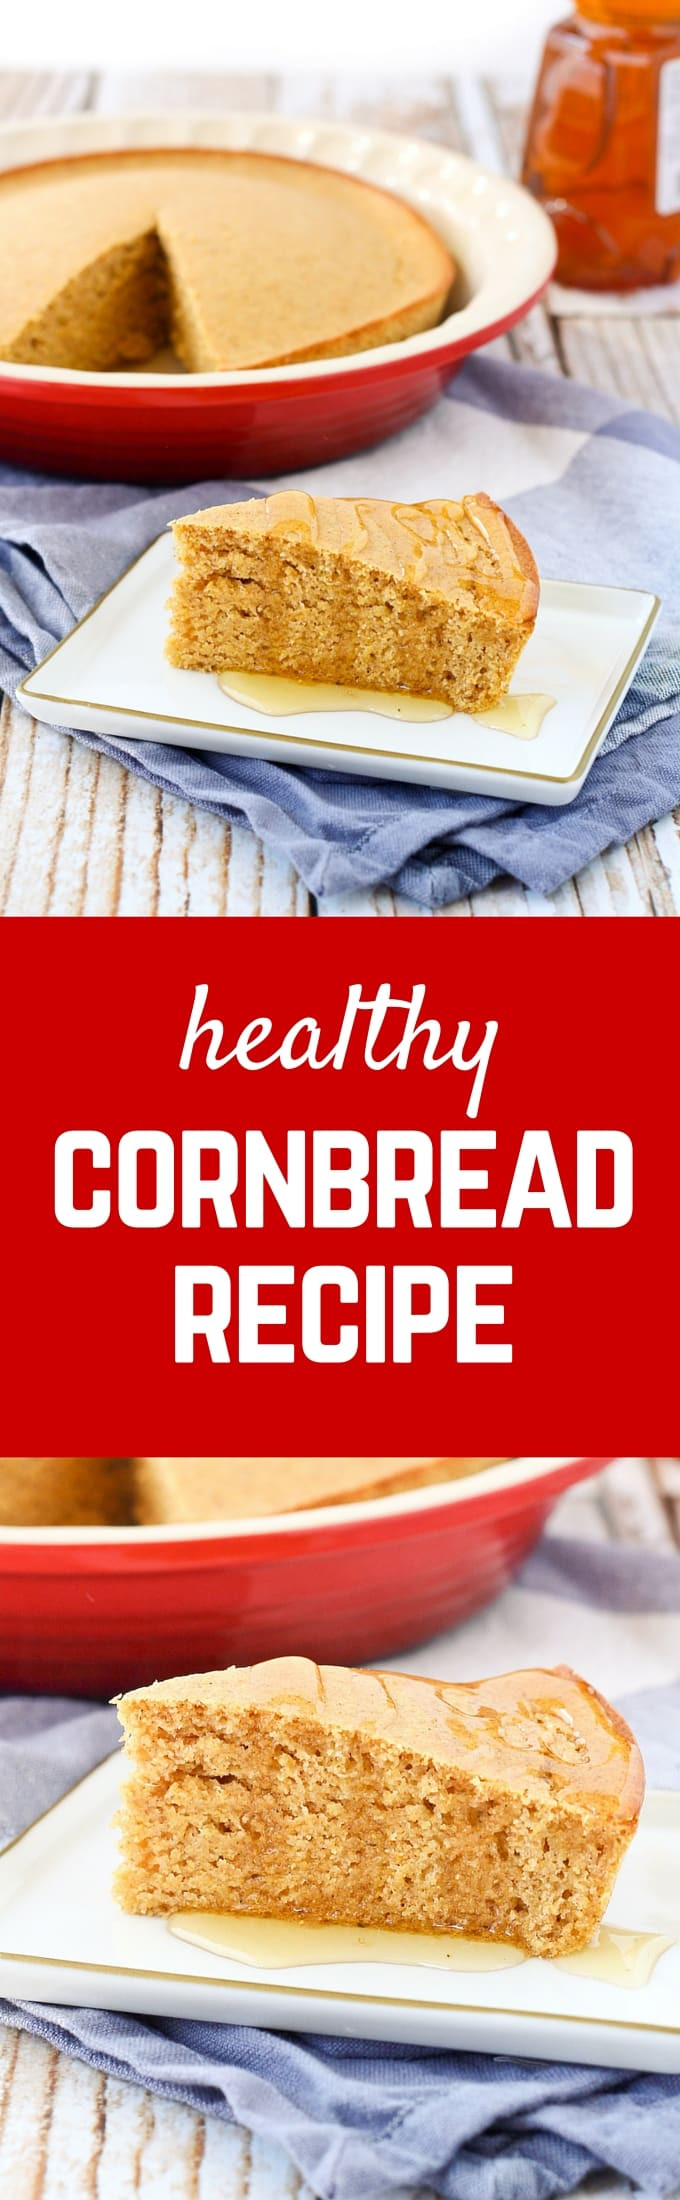 Healthy Cornbread Recipe
 Healthy Cornbread Recipe whole wheat with VIDEO